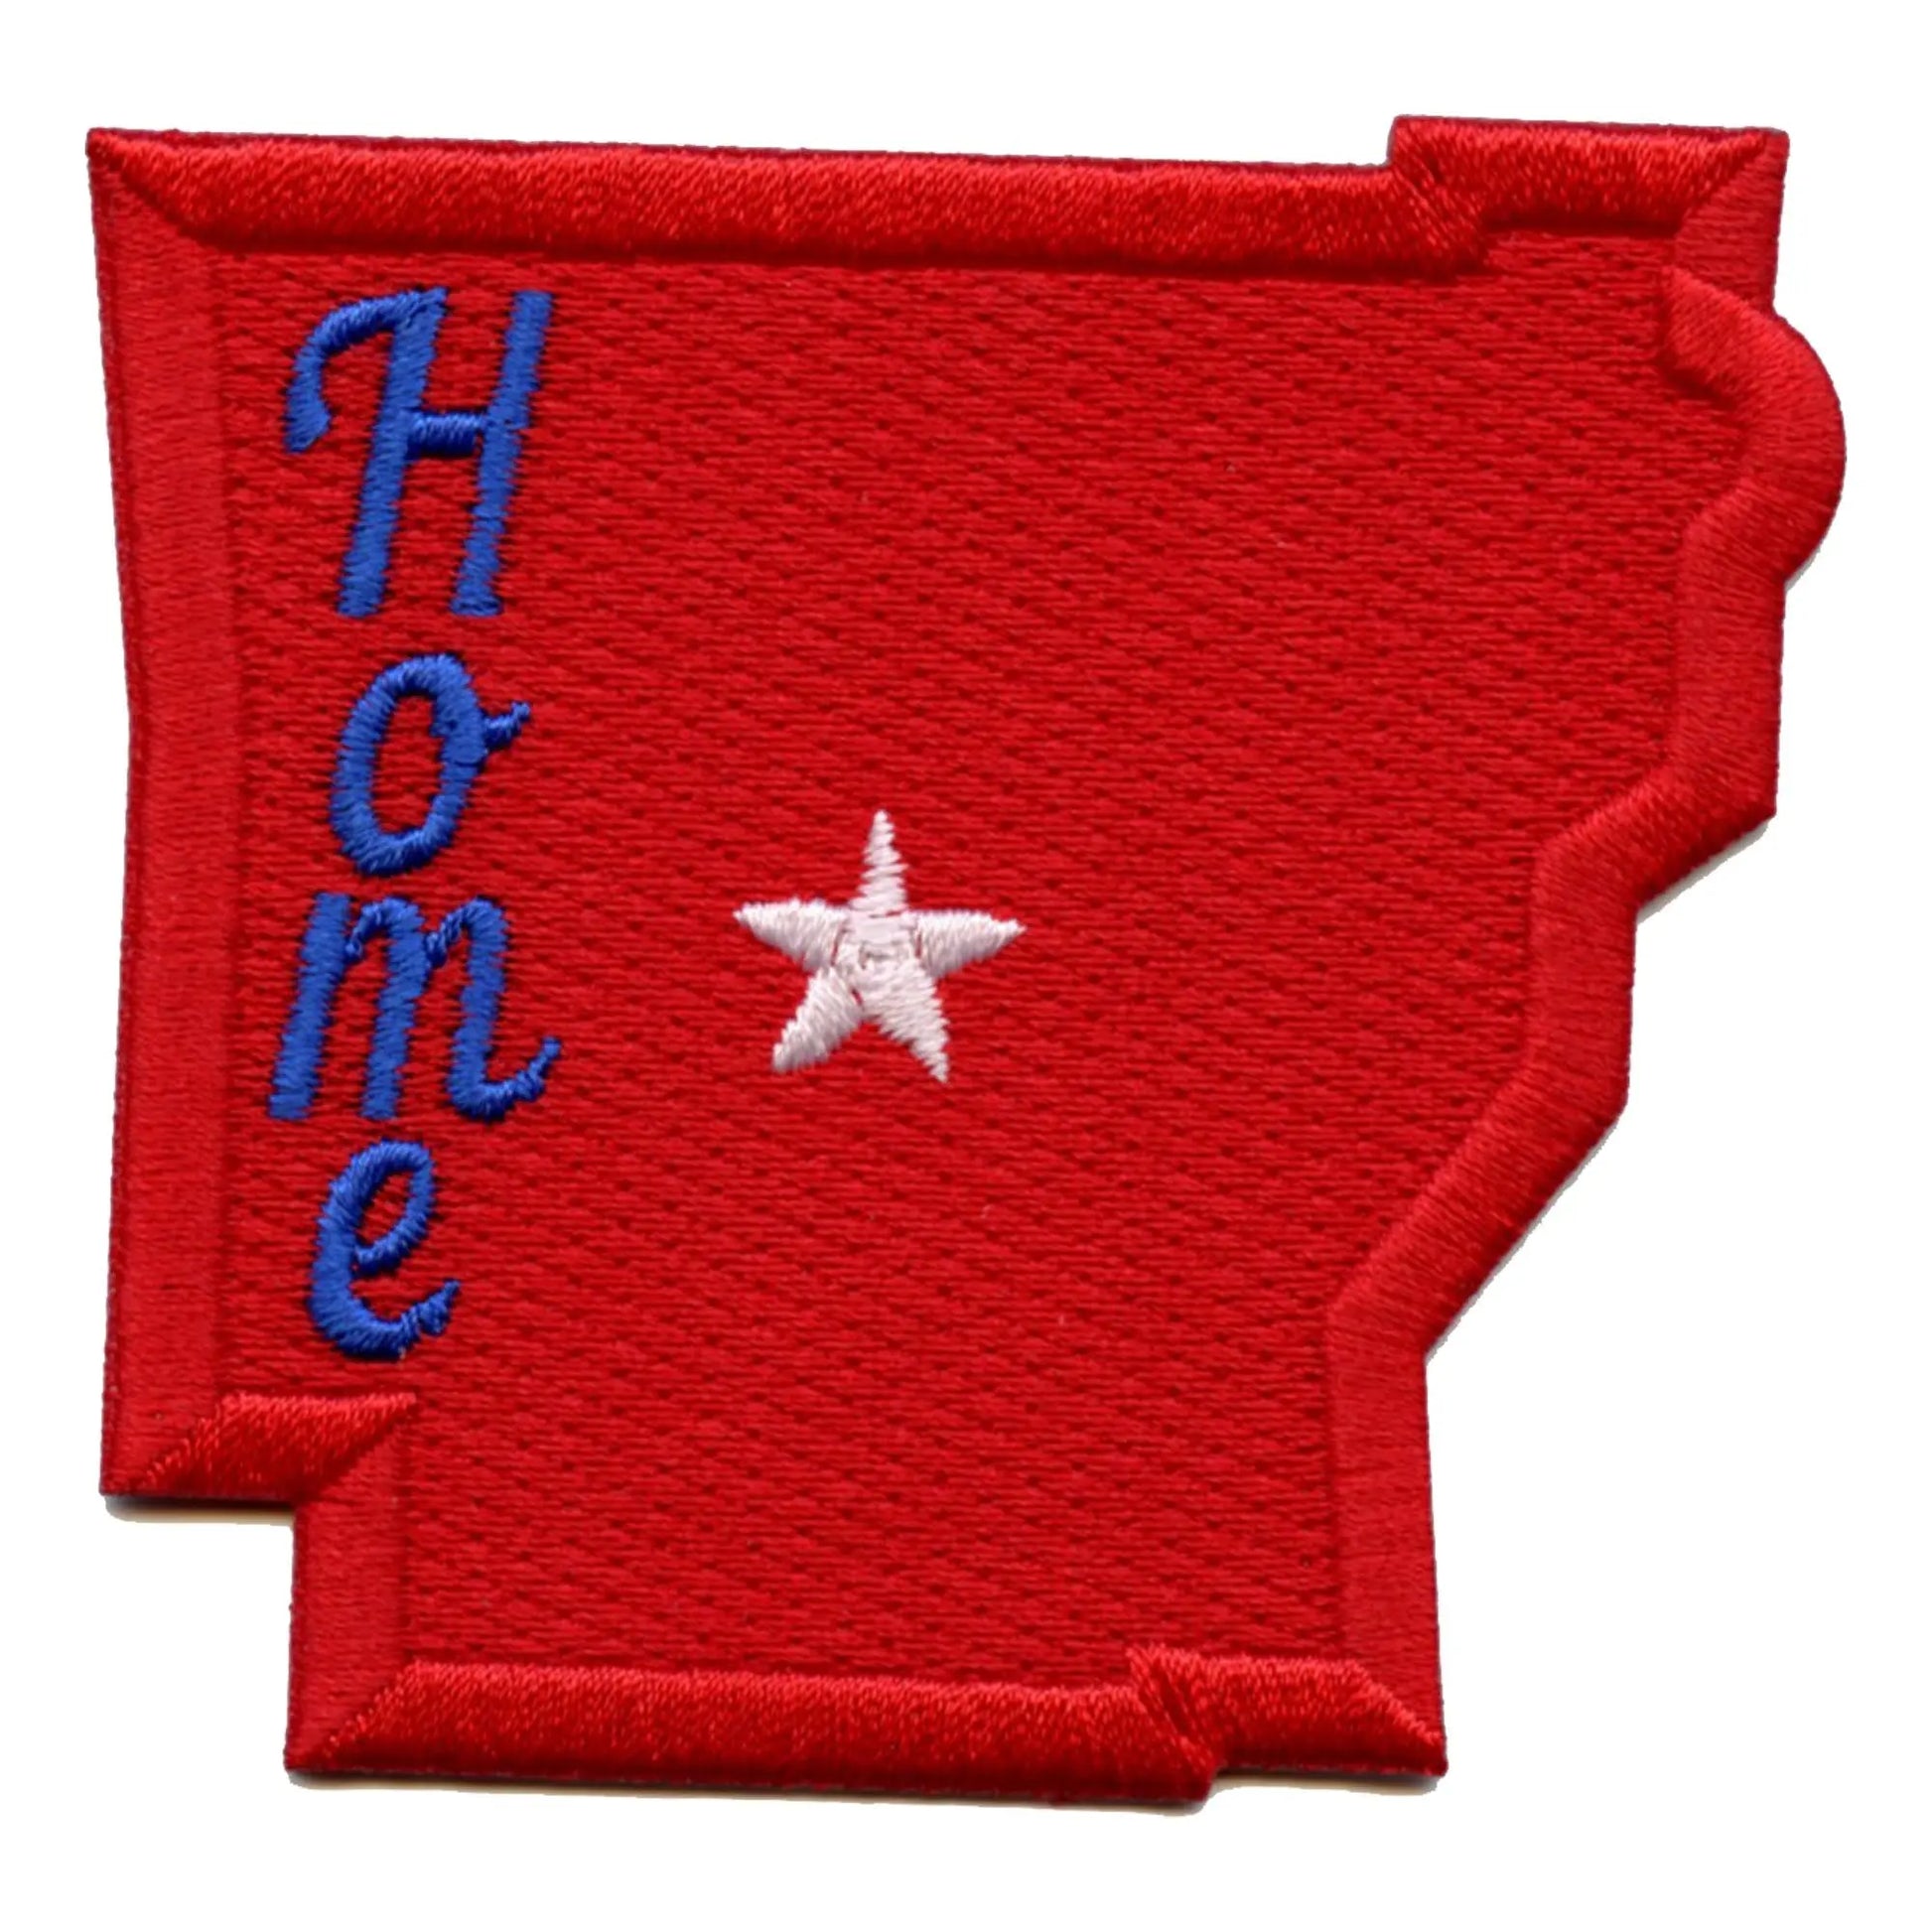 Arkansas Home State Embroidered Iron On Patch 